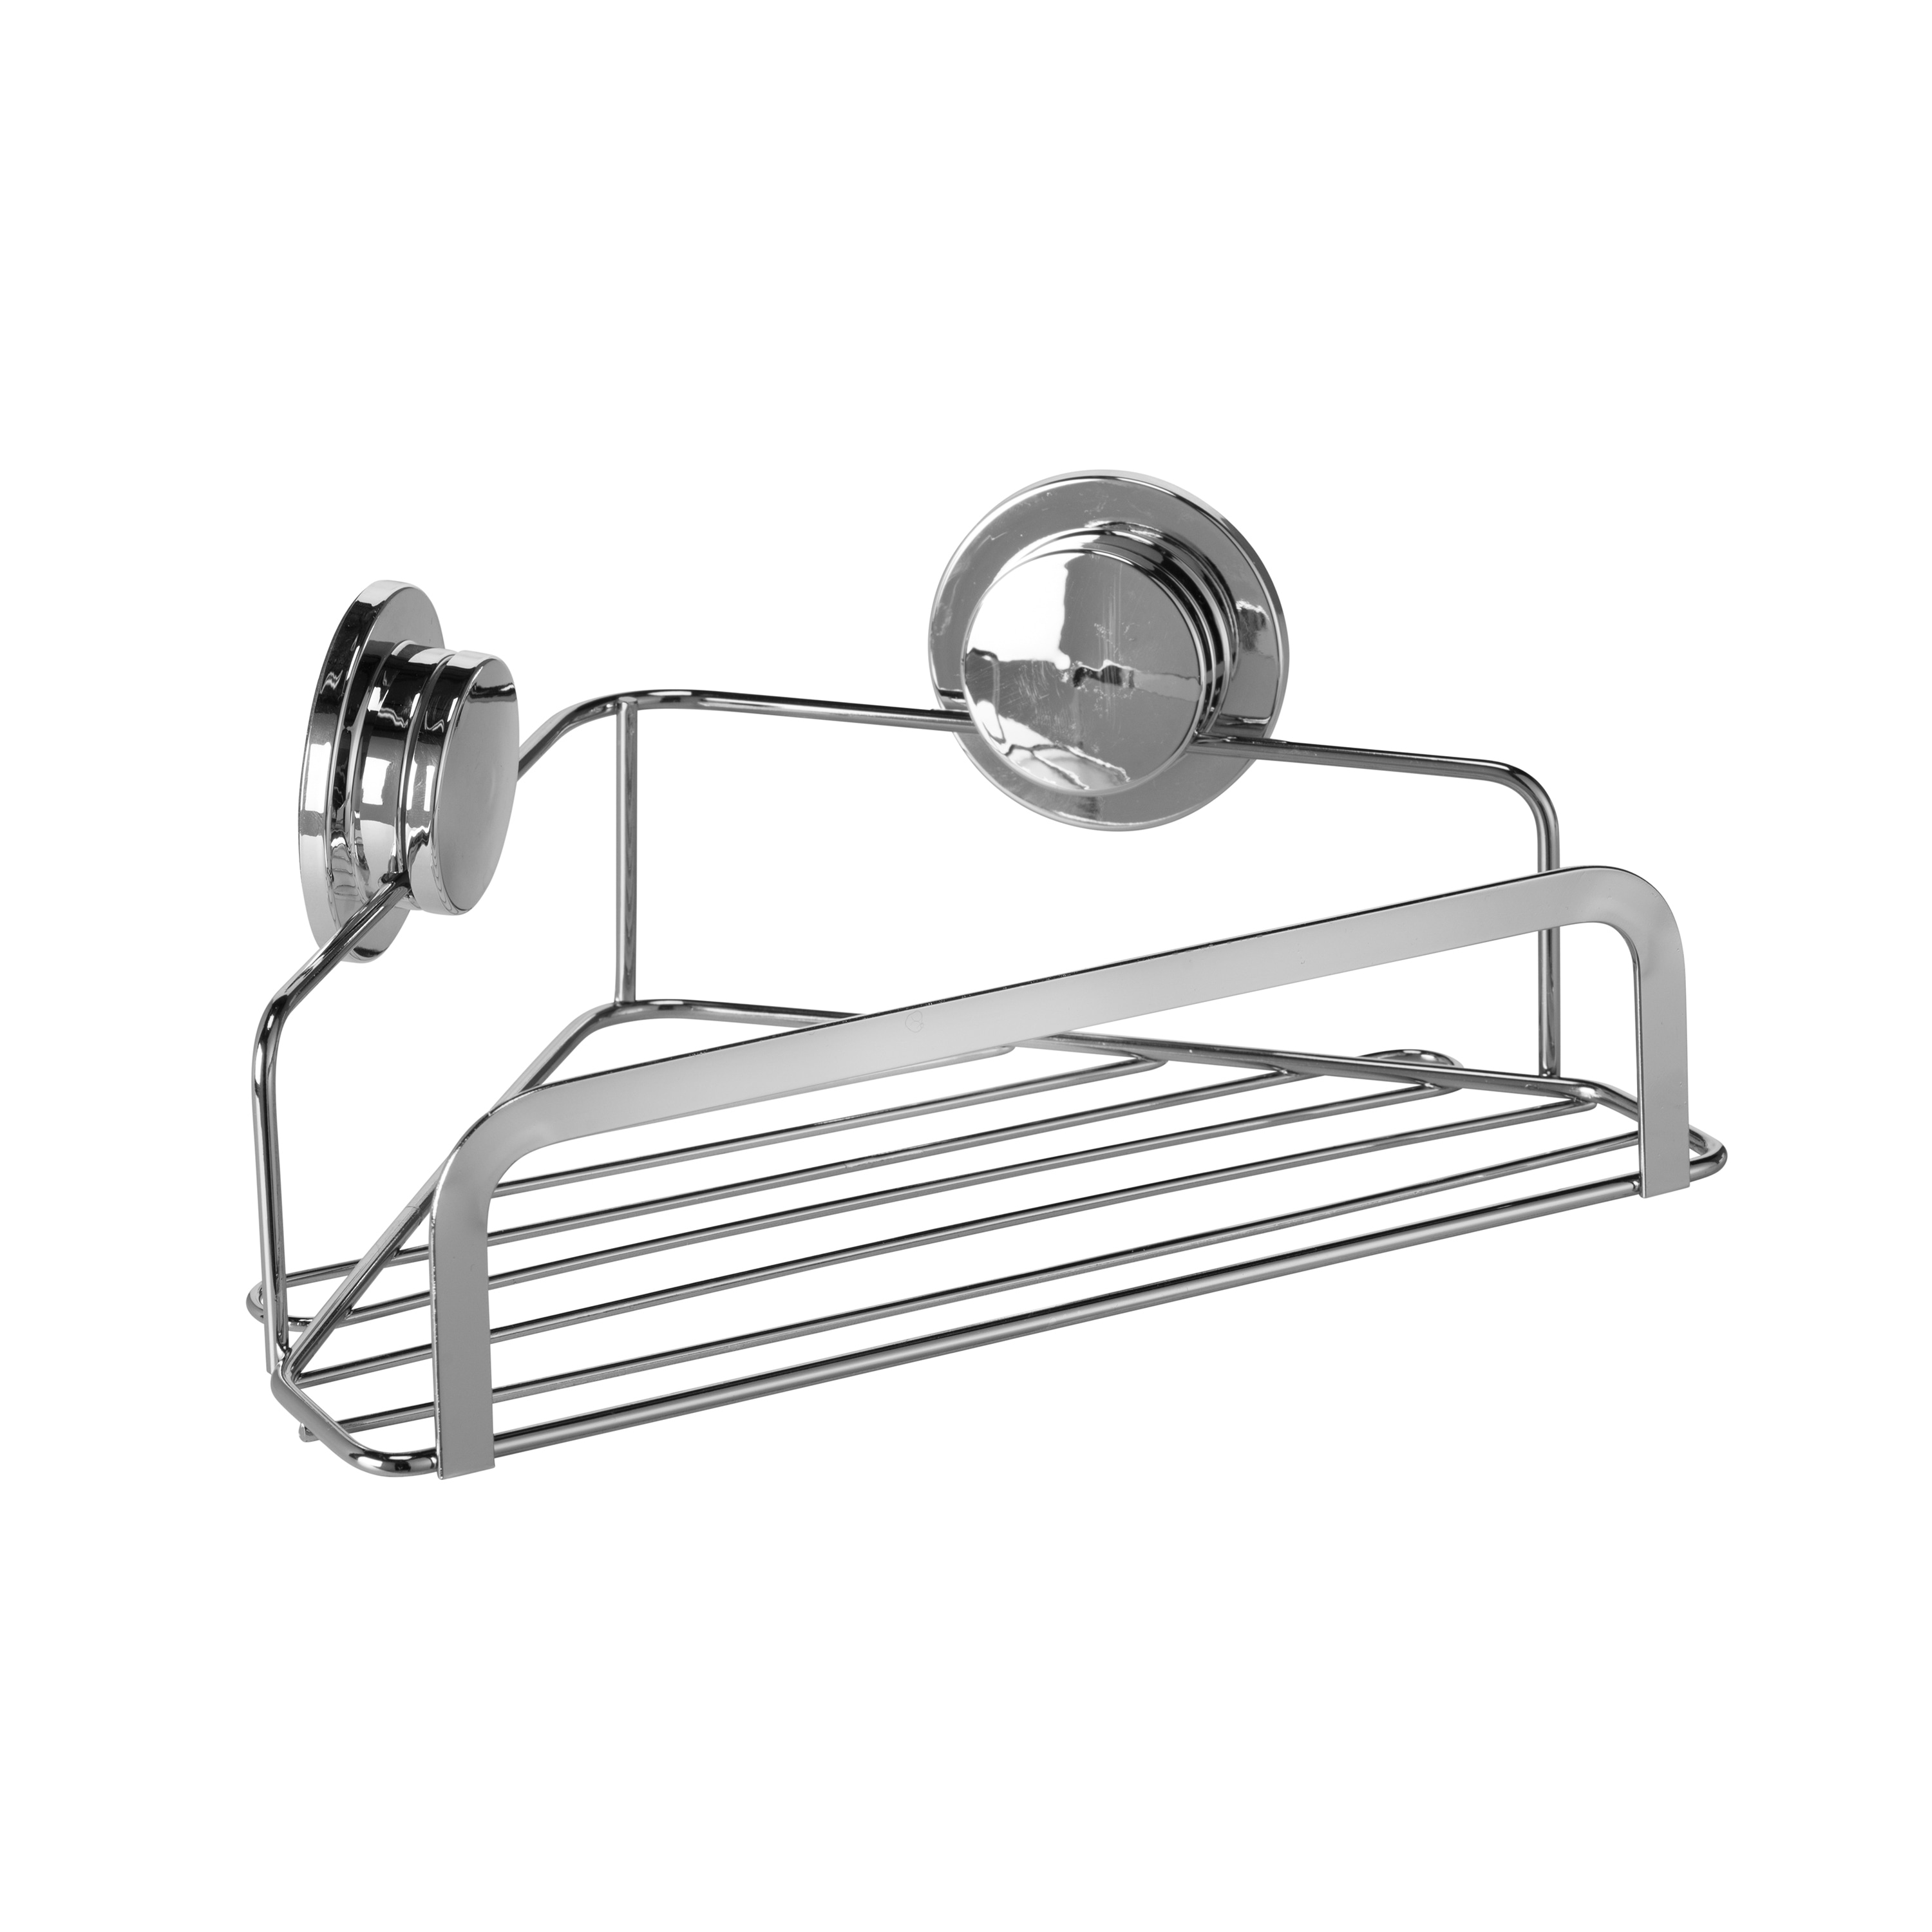 Croydex Stick 'n' Lock Adhesive Two Tier Shower Caddy, Chrome - On Sale -  Bed Bath & Beyond - 38077186